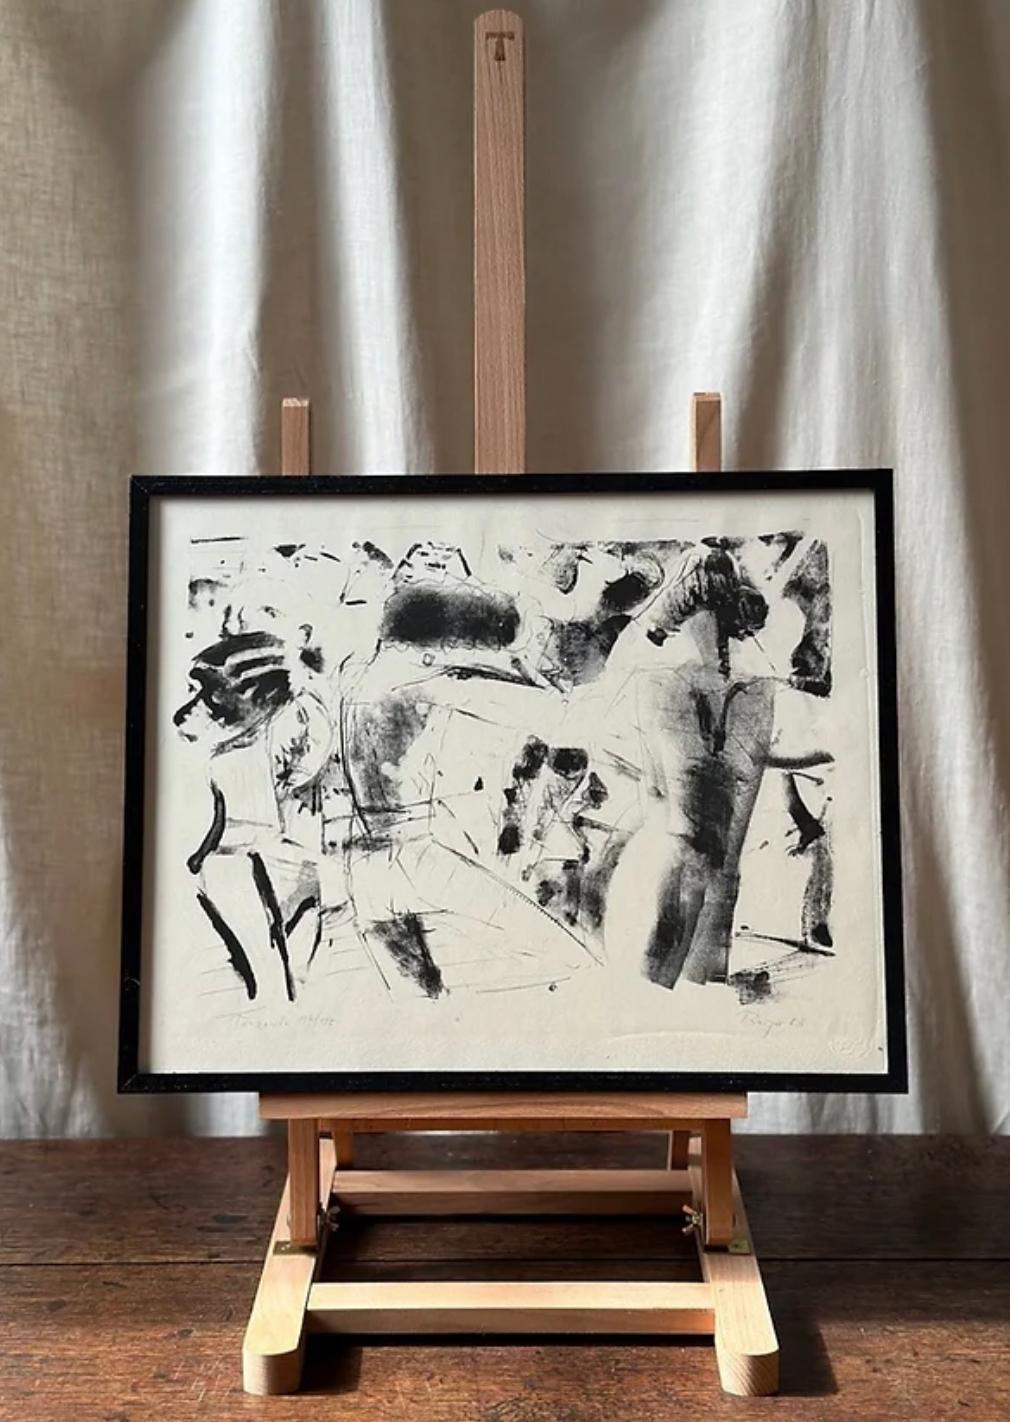 Framed Lithograph, Dance Company Leipzig, By Dietrich Burger (b 1935) , German 

Lithograph Signed & Dated

Framed Measurements - 51.5cm x 40 cm x 1.5cm

Dietrich Burger (born 14 August 1935) is a German painter and graphic artist.